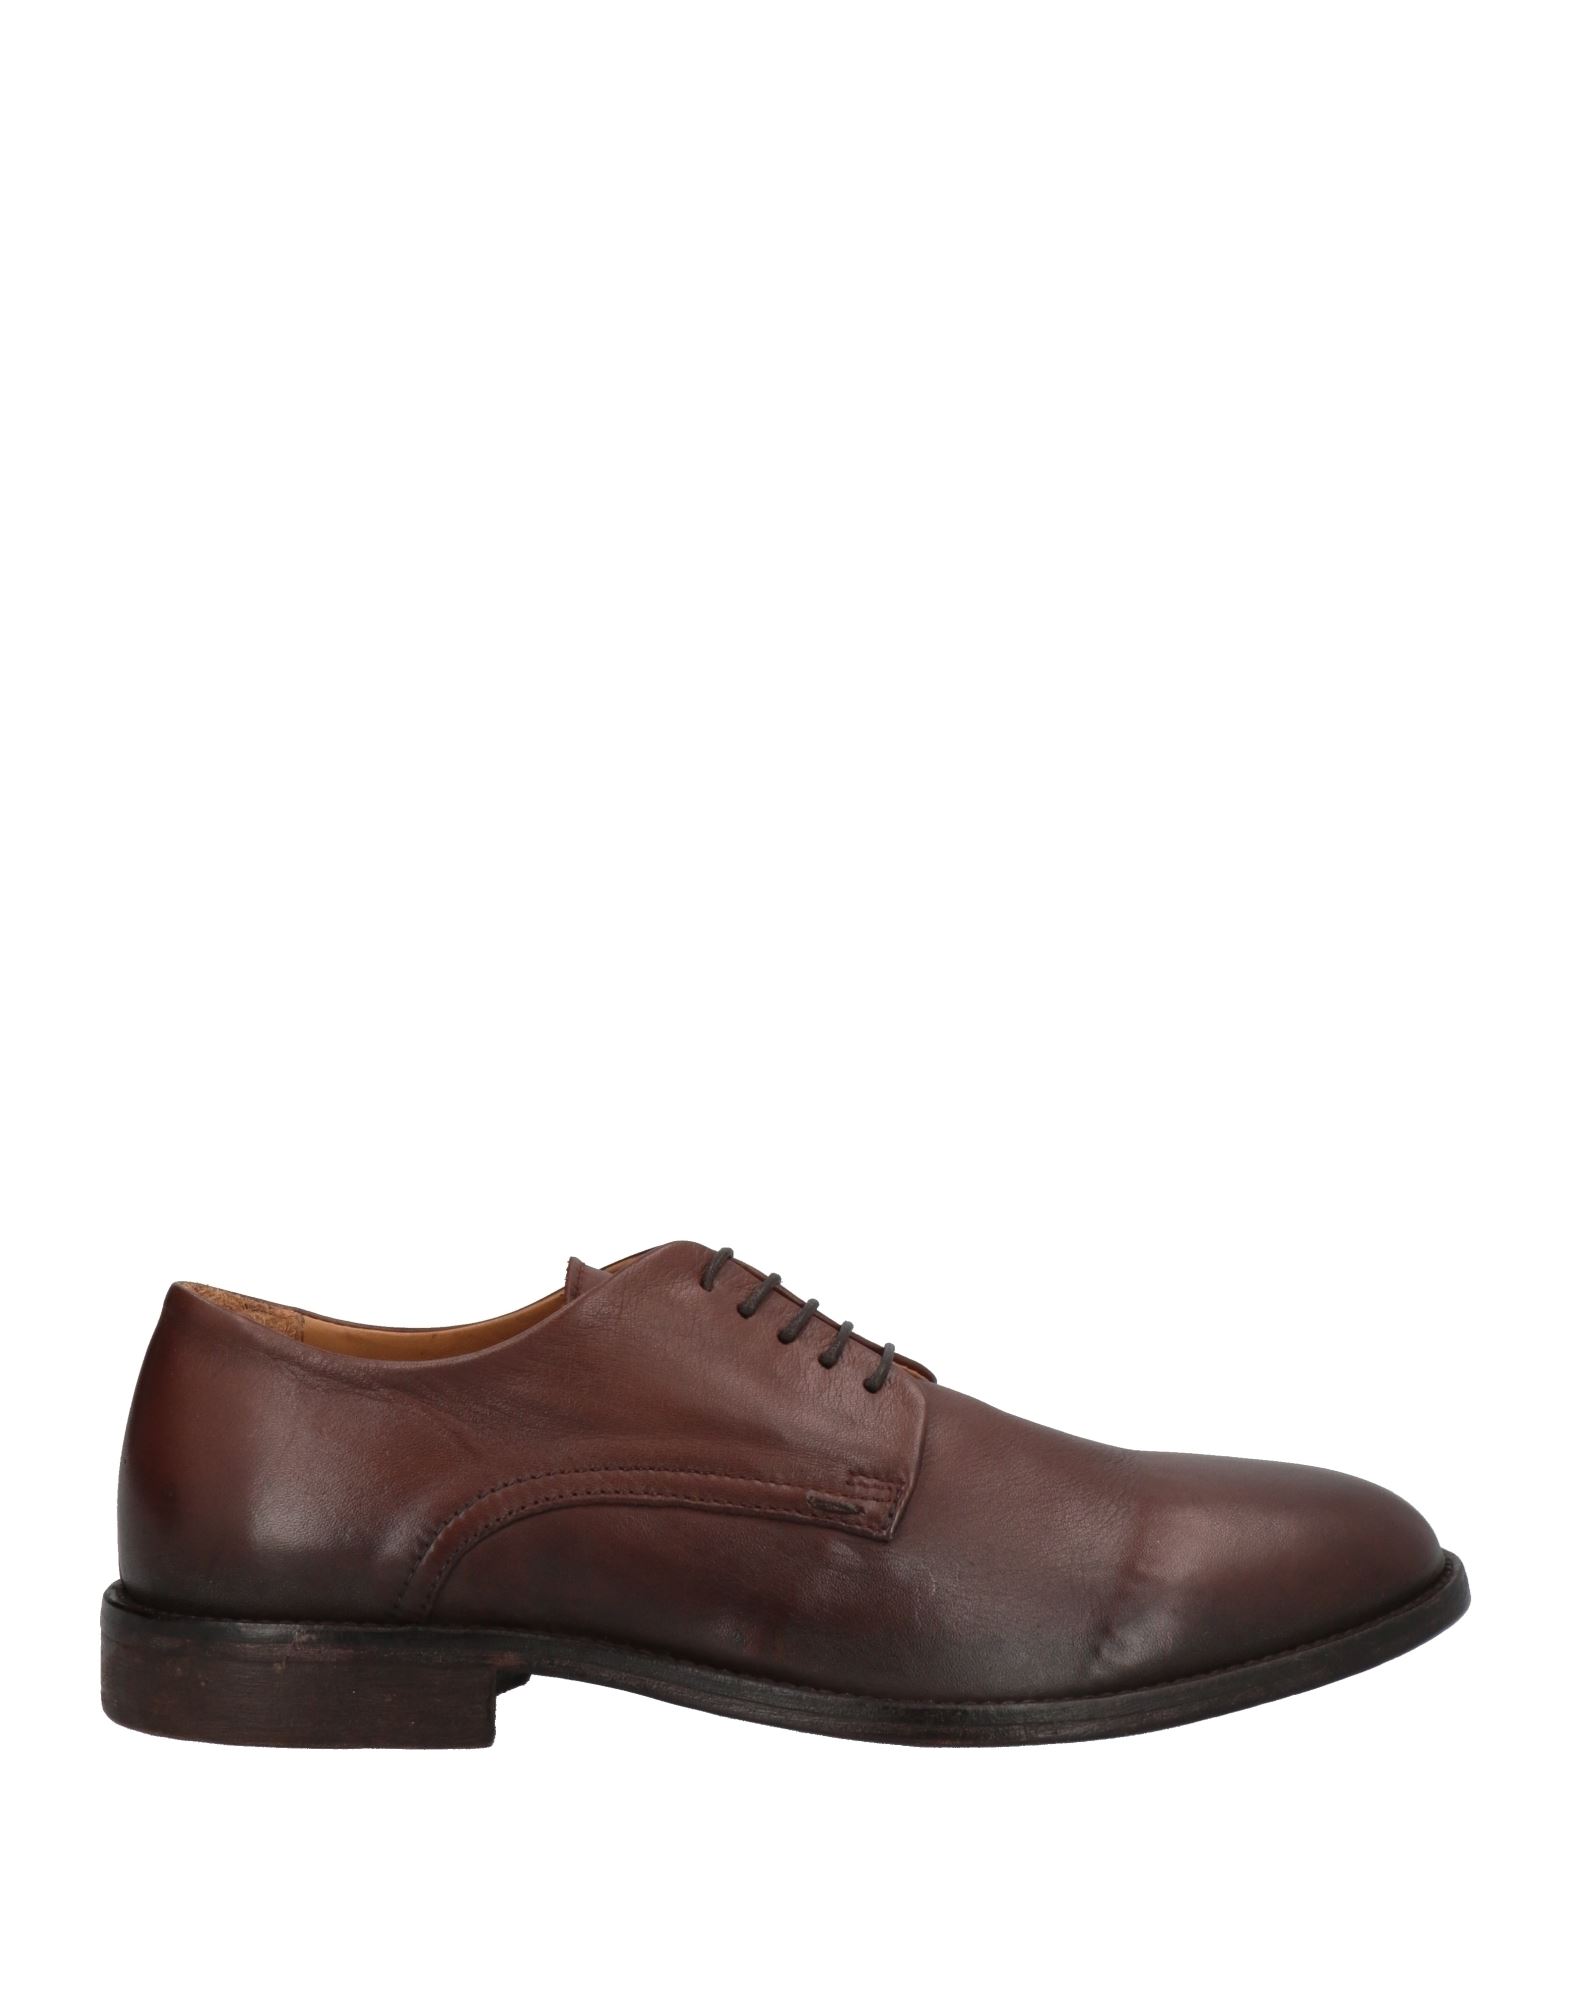 Moma Man Lace-up Shoes Dark Brown Size 8 Calfskin